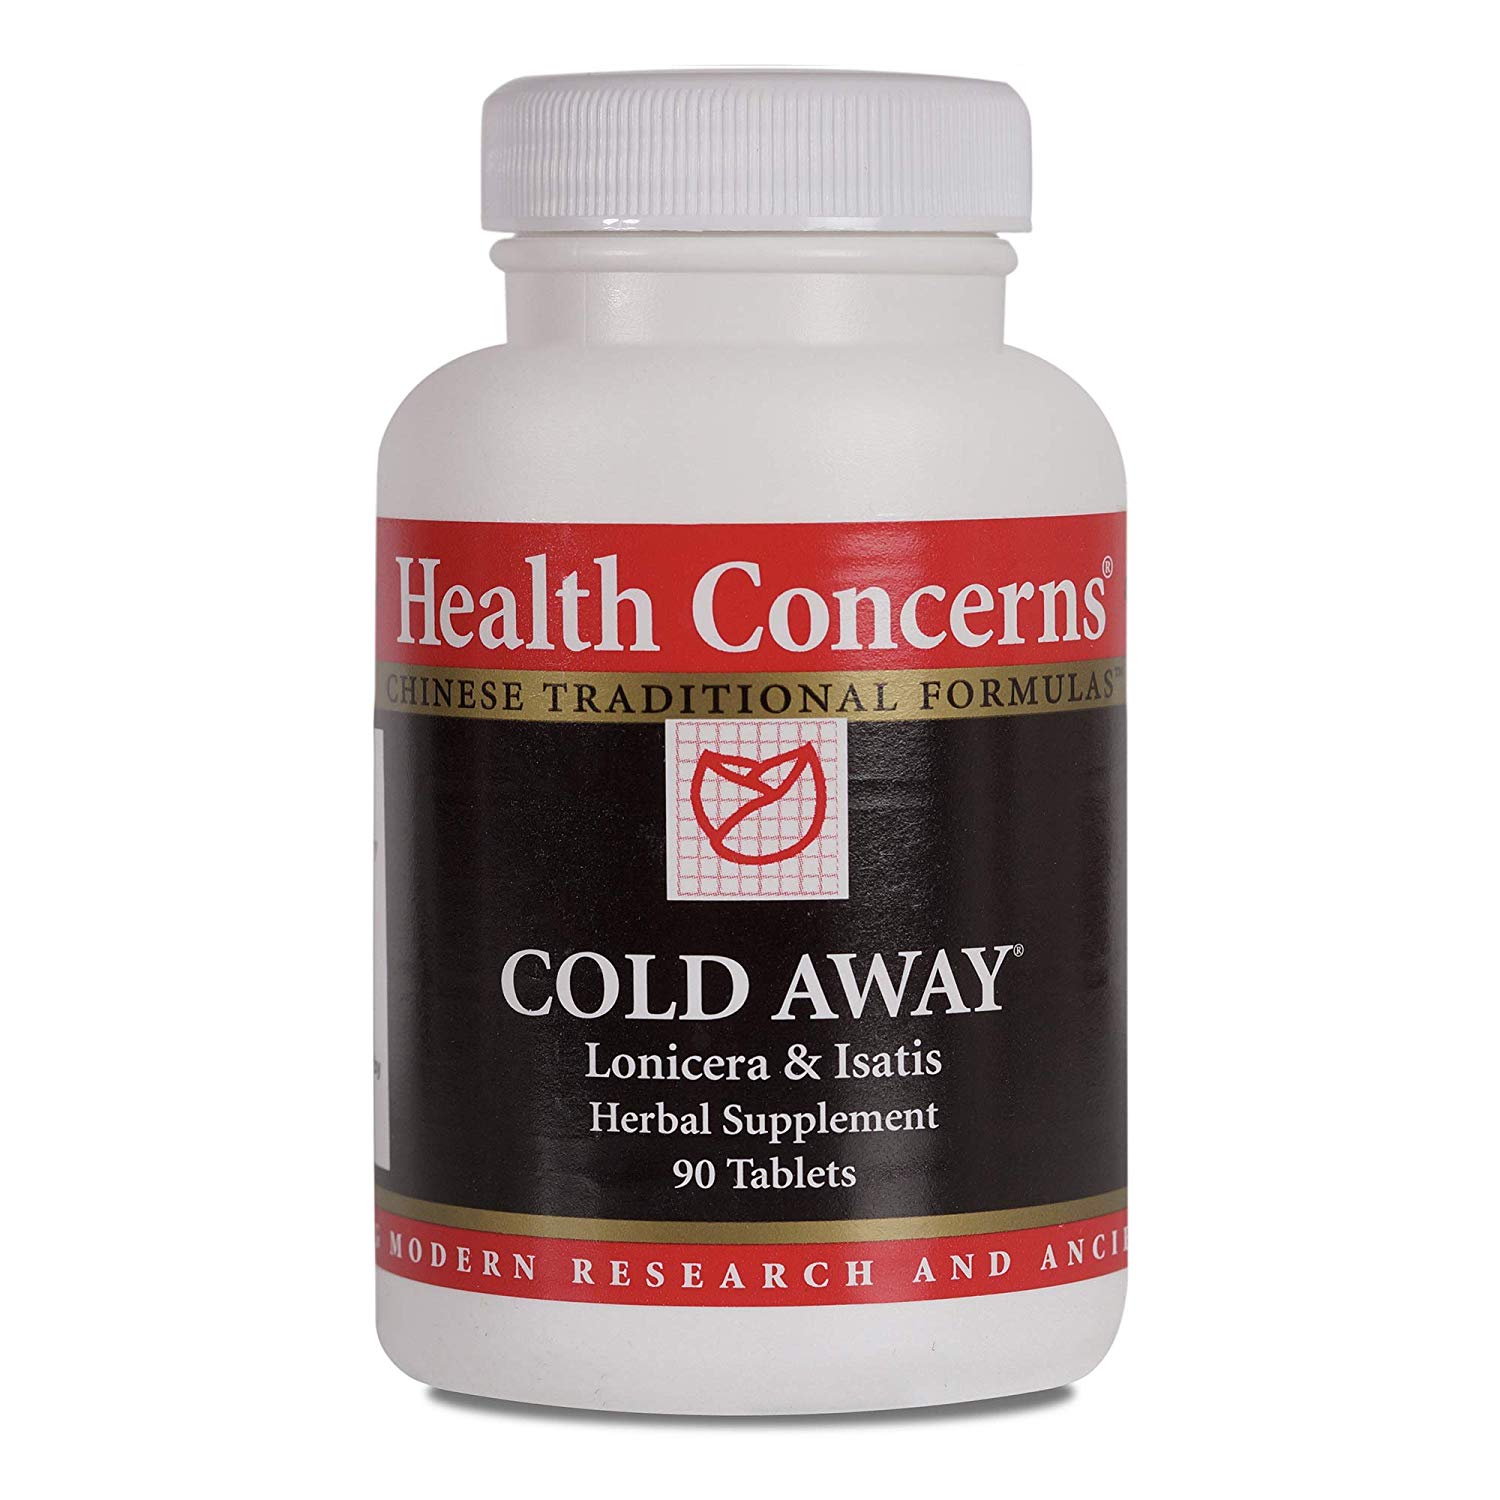 Cold Away by health concerns